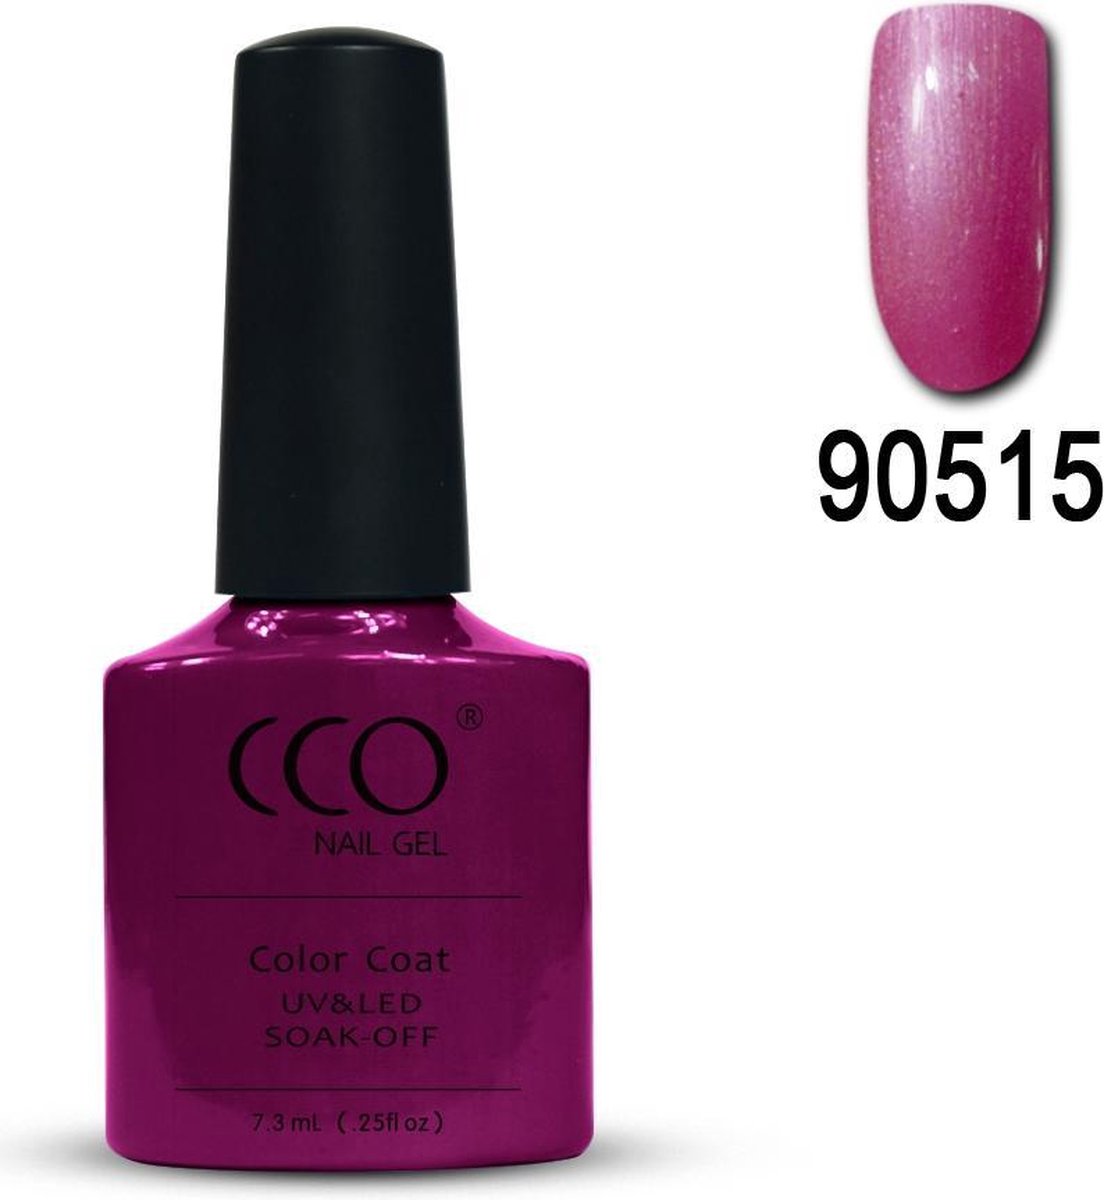 CCO Shellac - Sultry Sunset - Gel nagellak